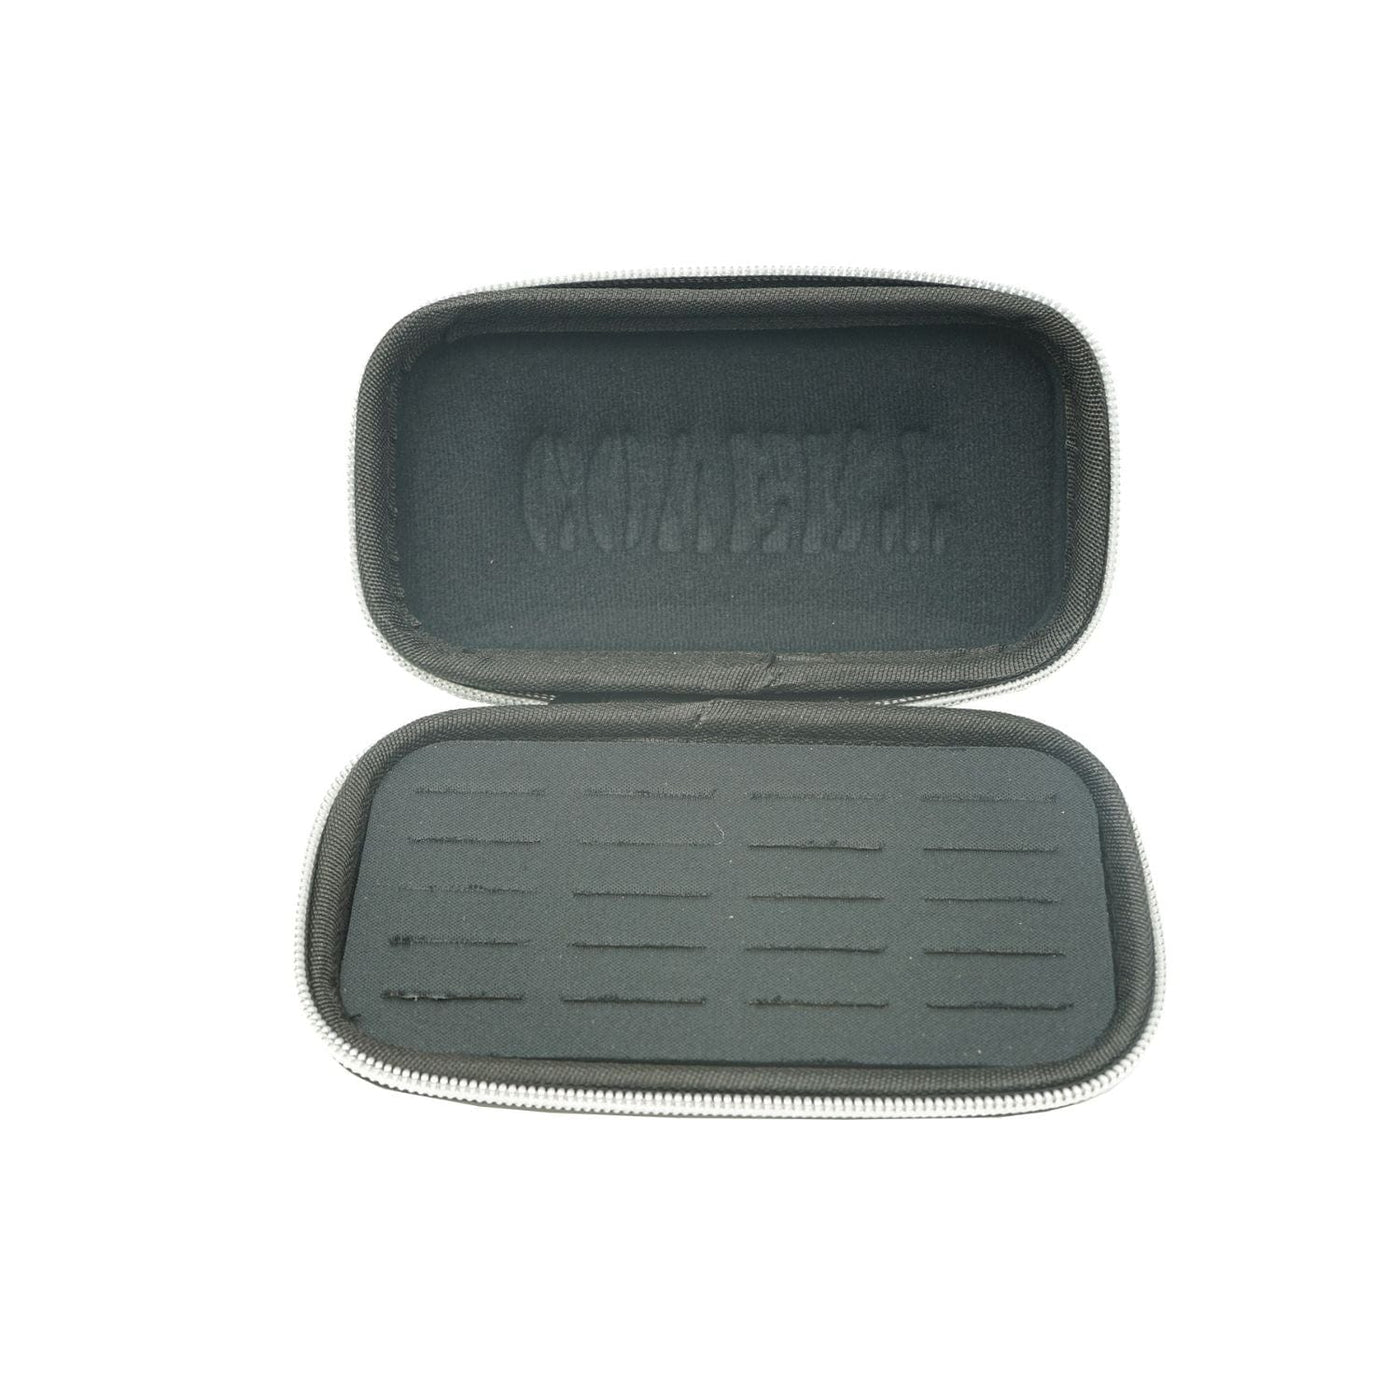 Covert Scouting Cameras Covert SD Card Case Hunting